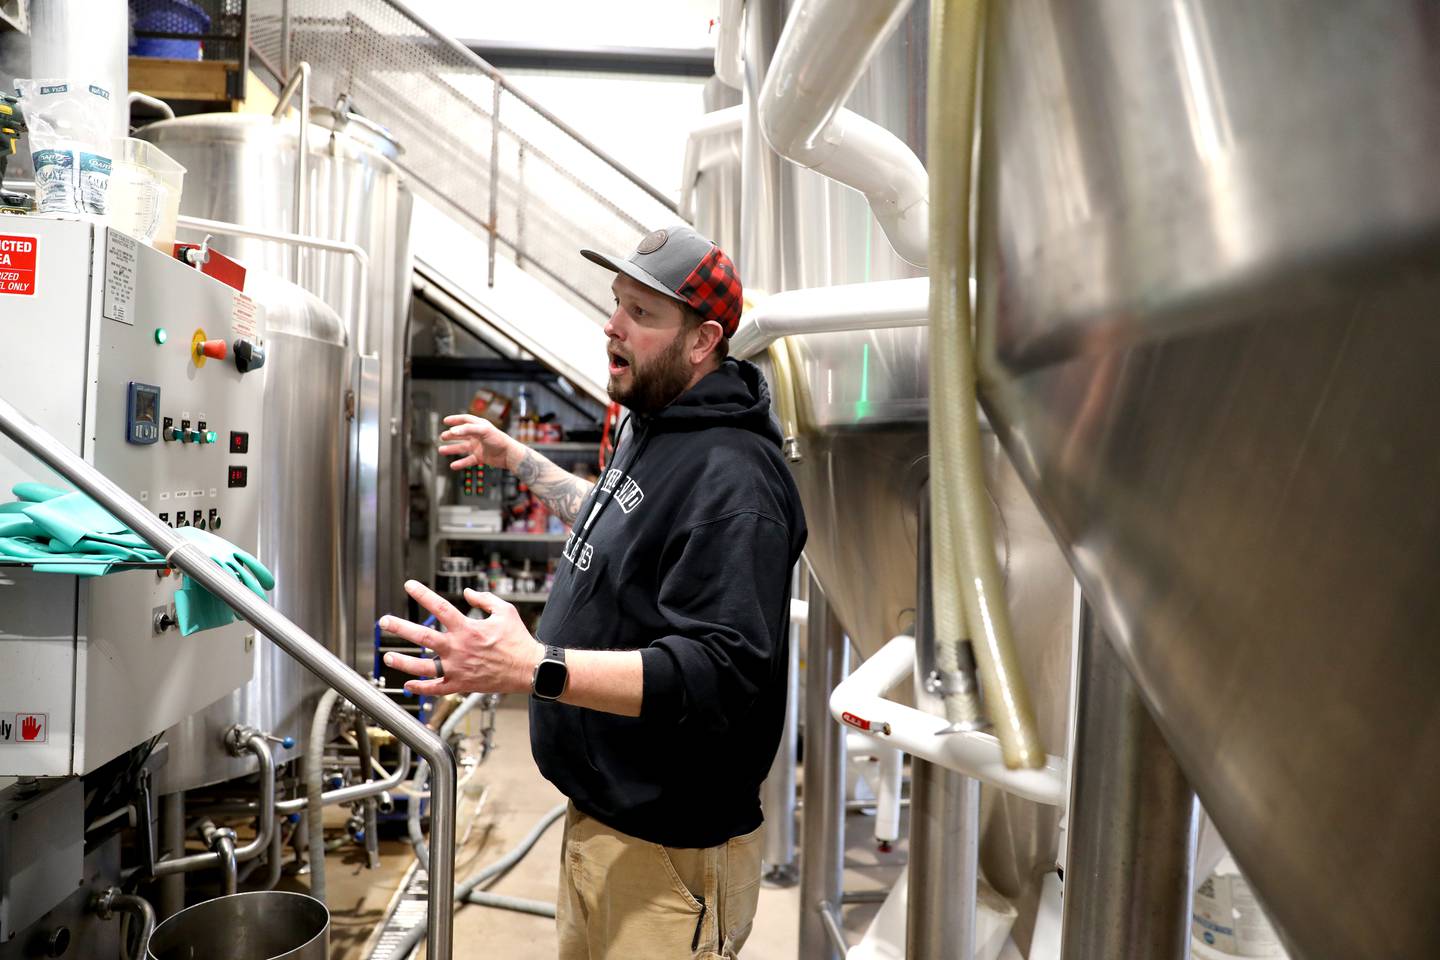 Obscurity head brewer Carson Souza at the Obscurity Brewery in Elburn.